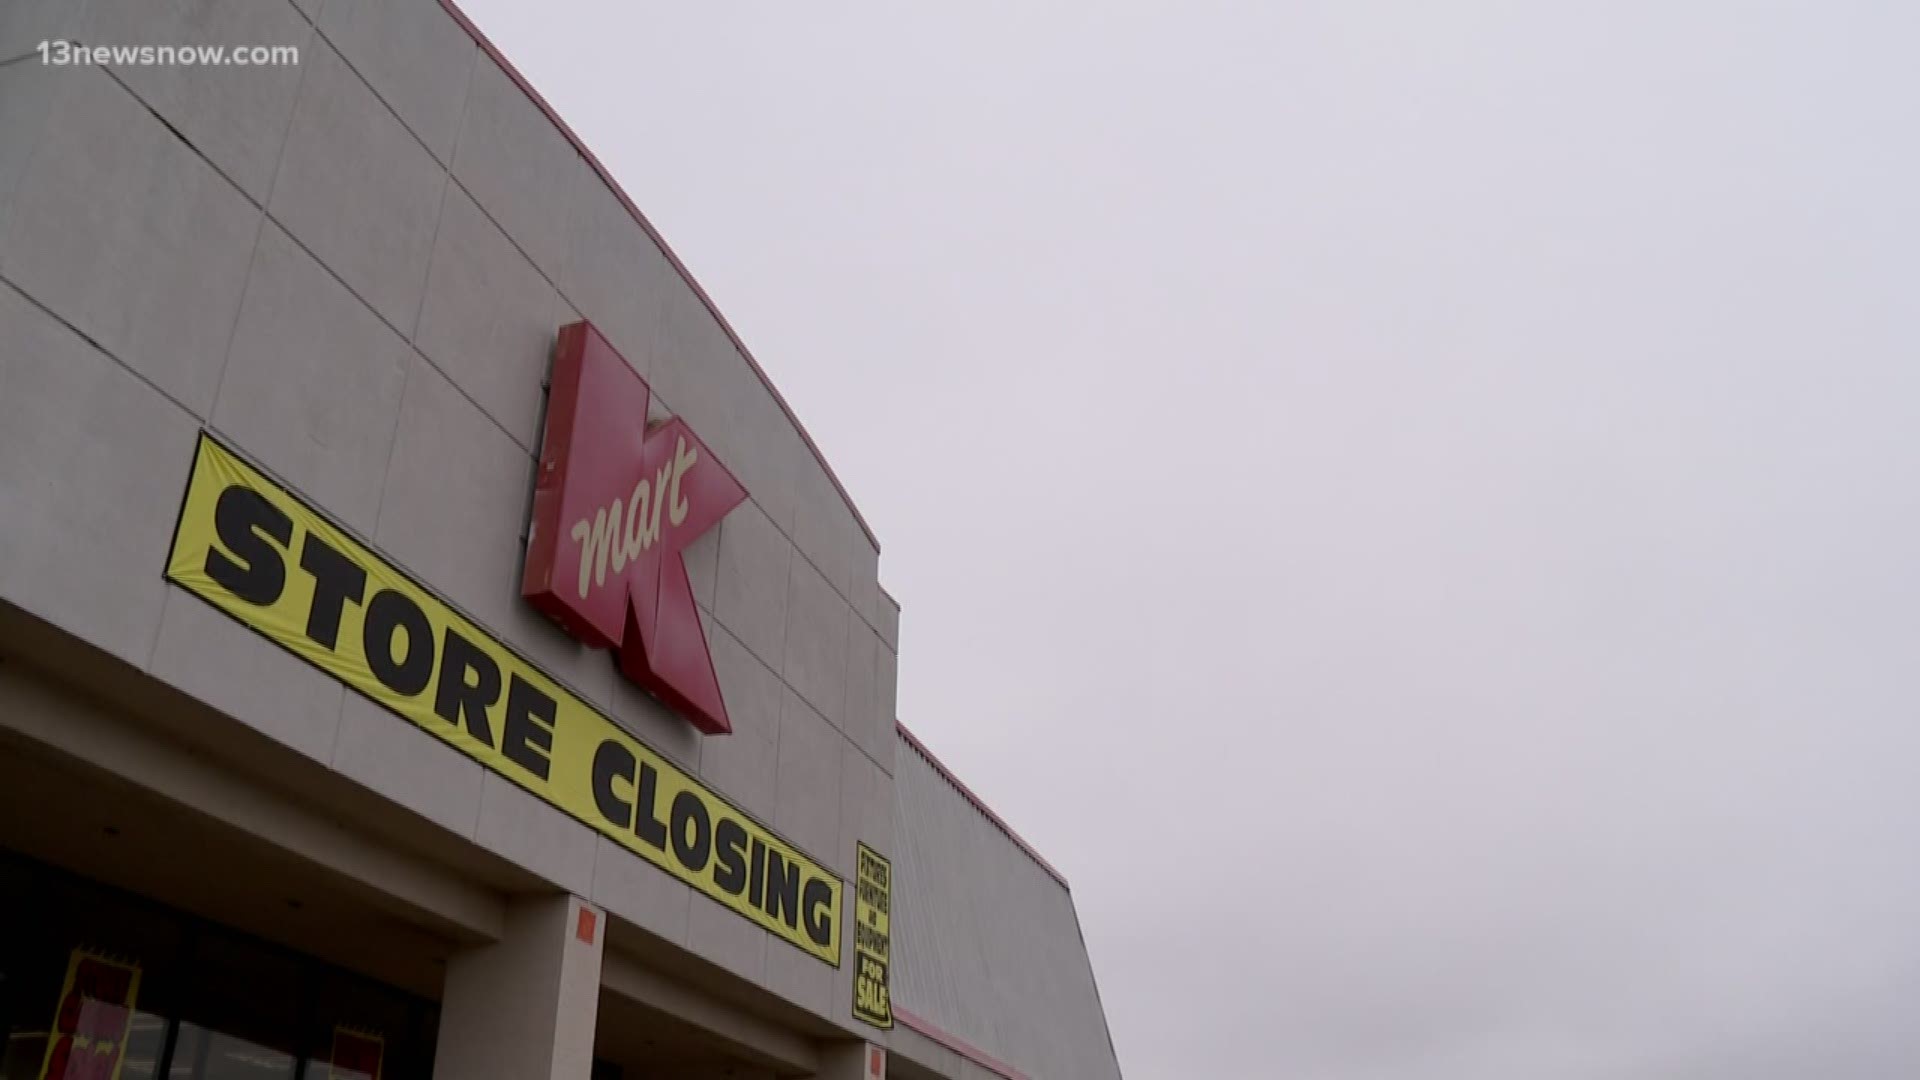 Another big box store is closing a number of stores around the U.S., including one in Hampton Roads. Kmart in Chesapeake is closing down.